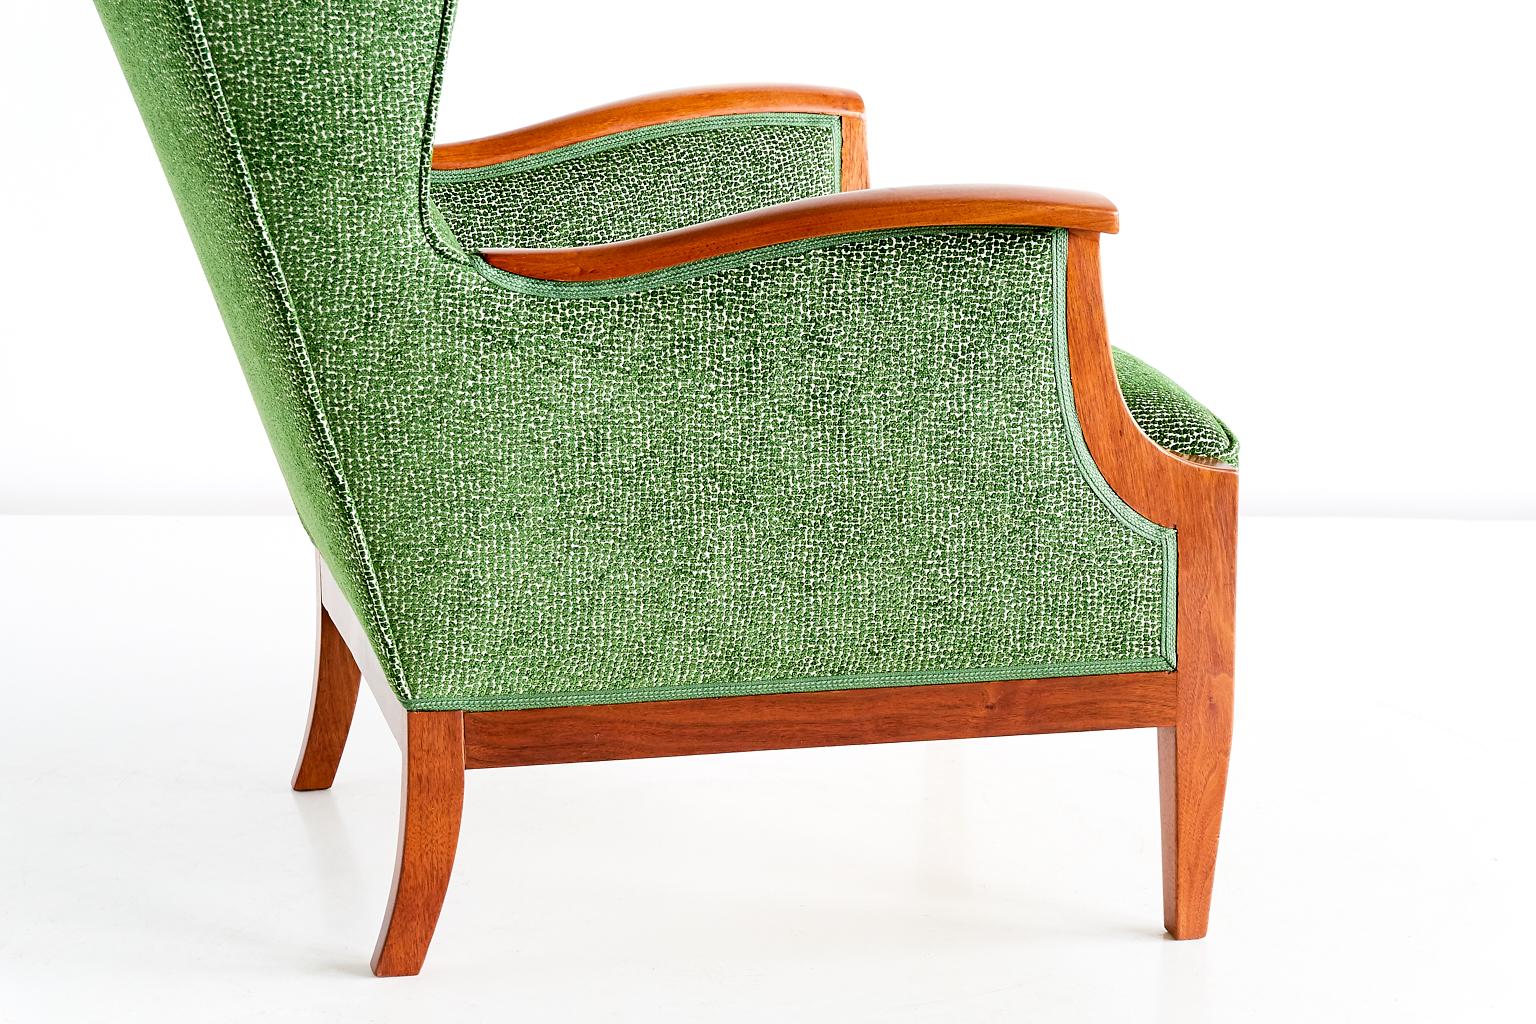 Scandinavian Modern Frits Henningsen Wingback Chair in Walnut and Green Rubelli Fabric, 1930s For Sale